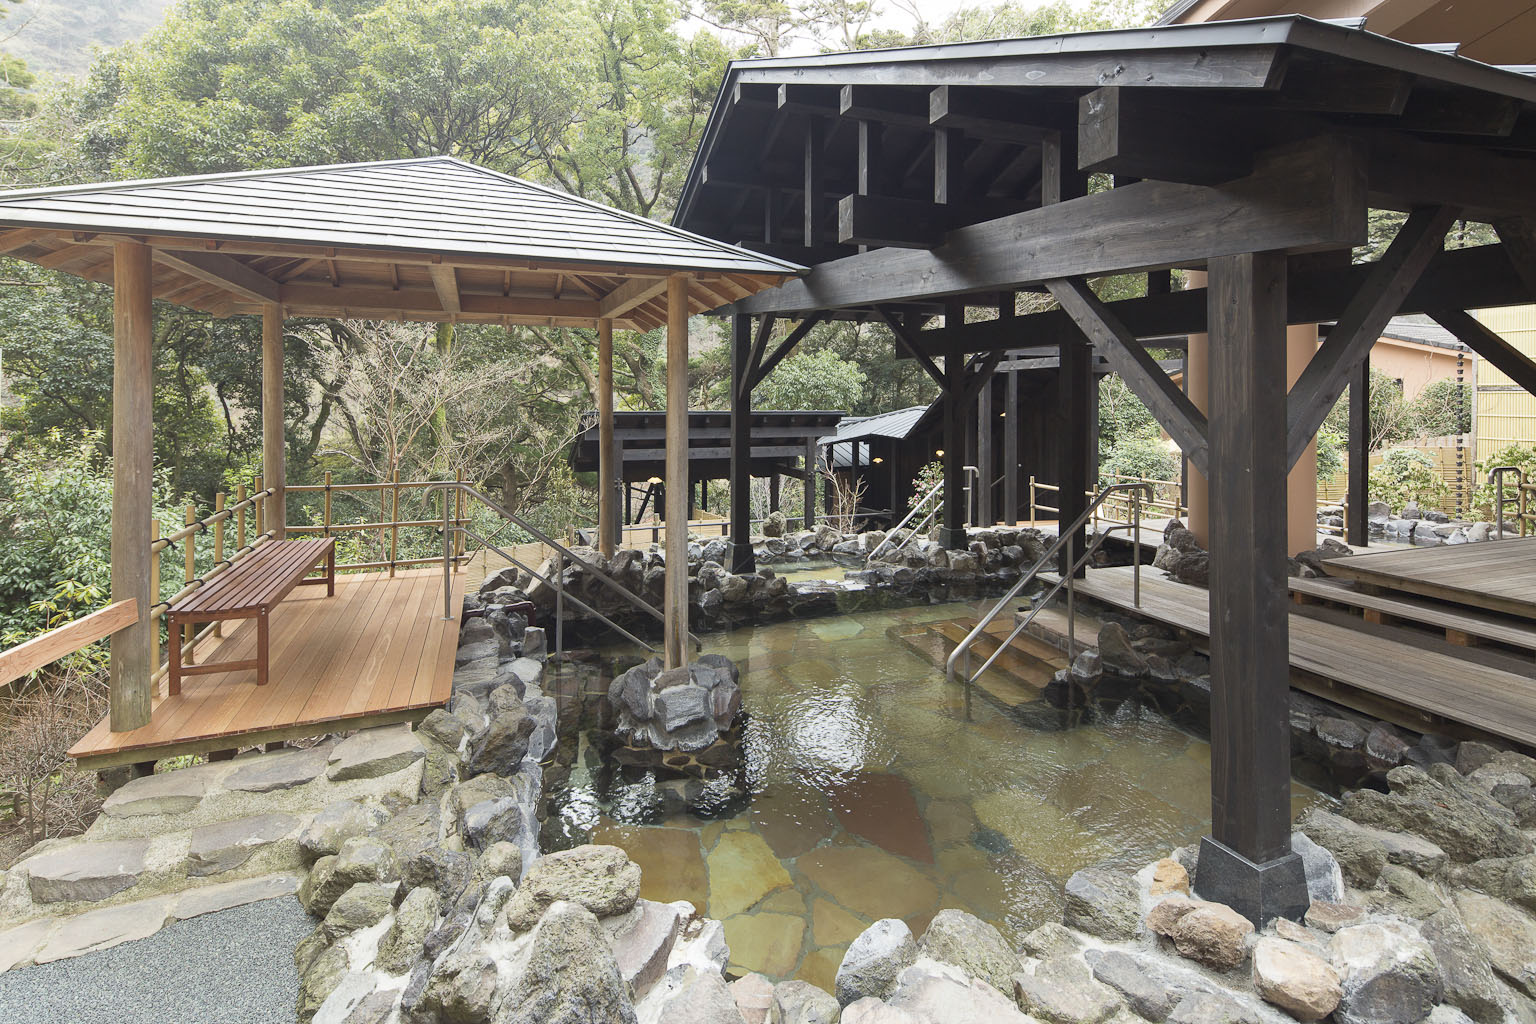 The great outdoors: Hakone Yuryo's outdoor baths offer a respite from city life. | KIT NAGAMURA